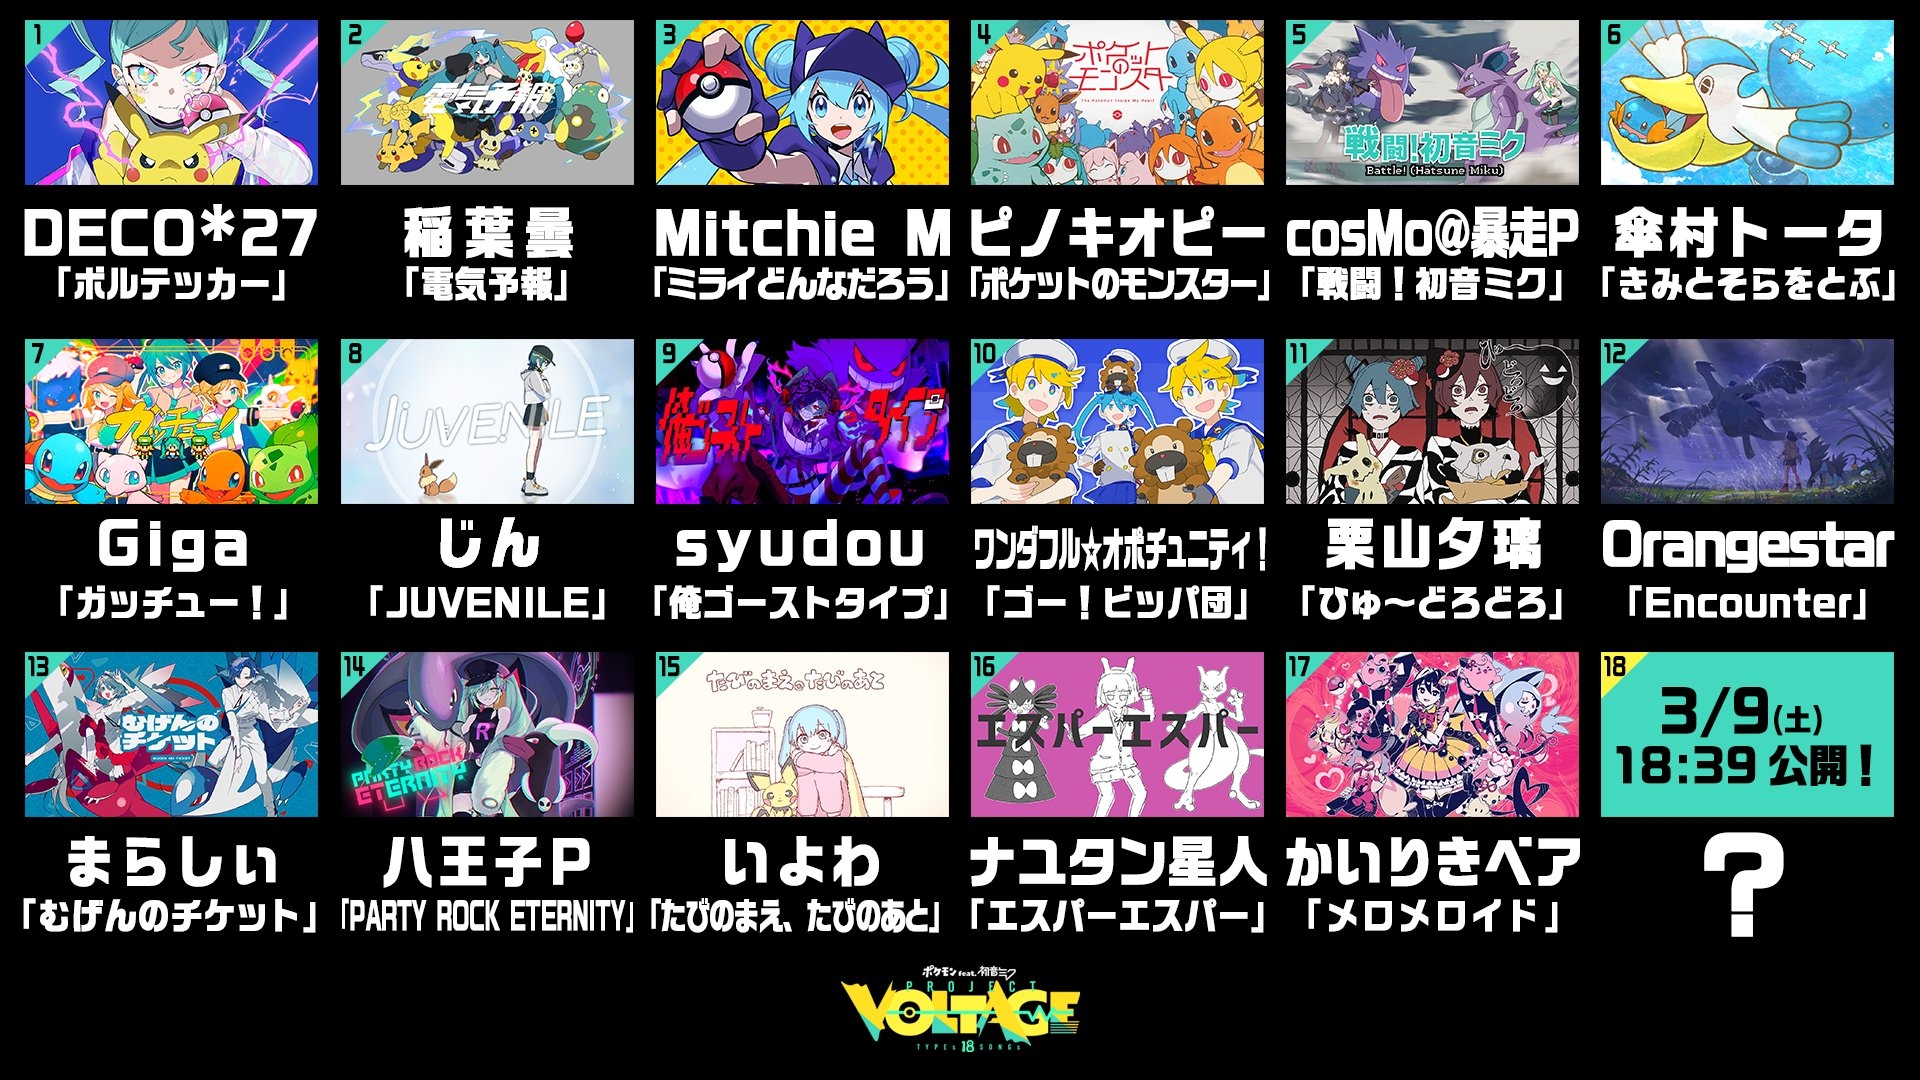 Japanese infographic showing all songs and Vocaloid producers from this project to date